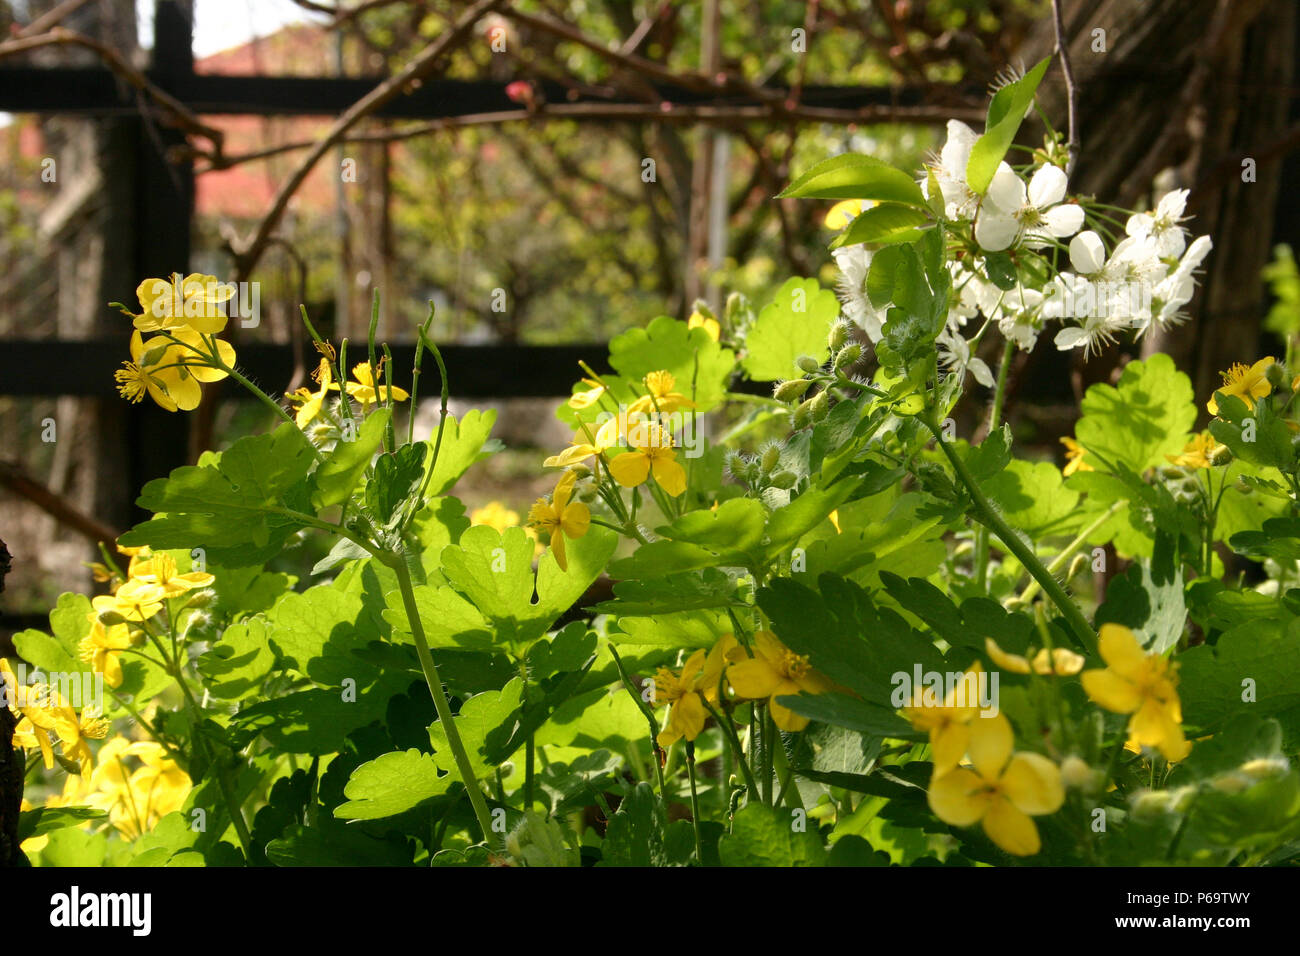 Garden in spring, with Chelidonium majus (Greater Celandine) and tree blossom Stock Photo